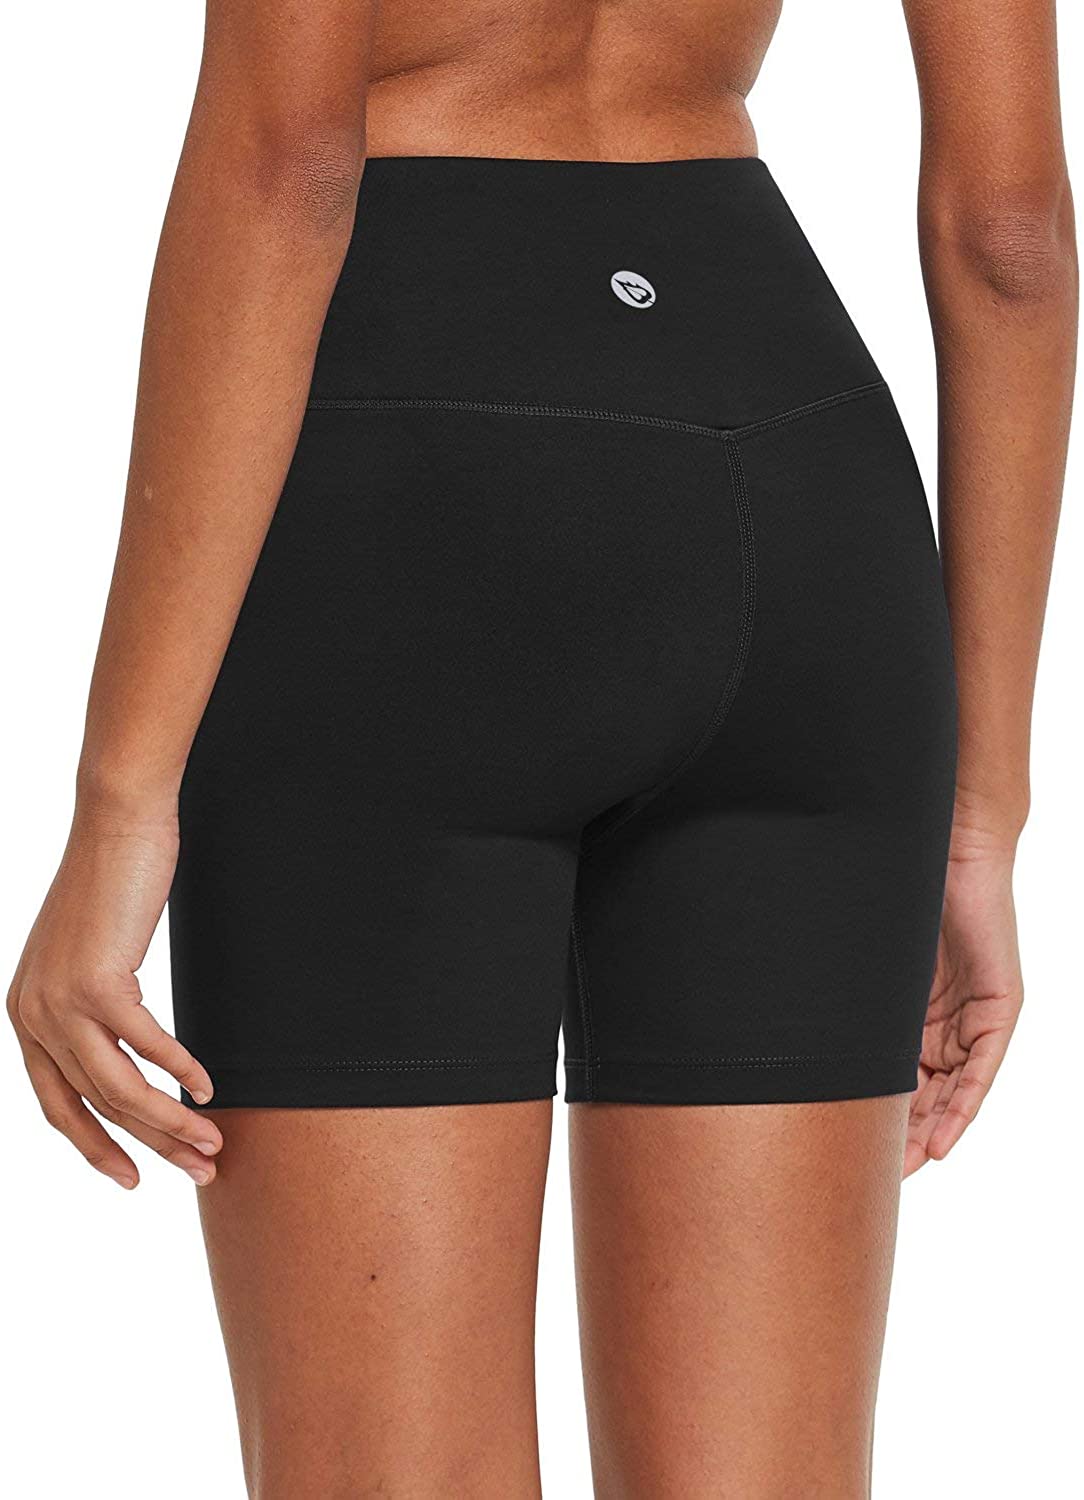 Are Compression Shorts Good For Cycling For Women